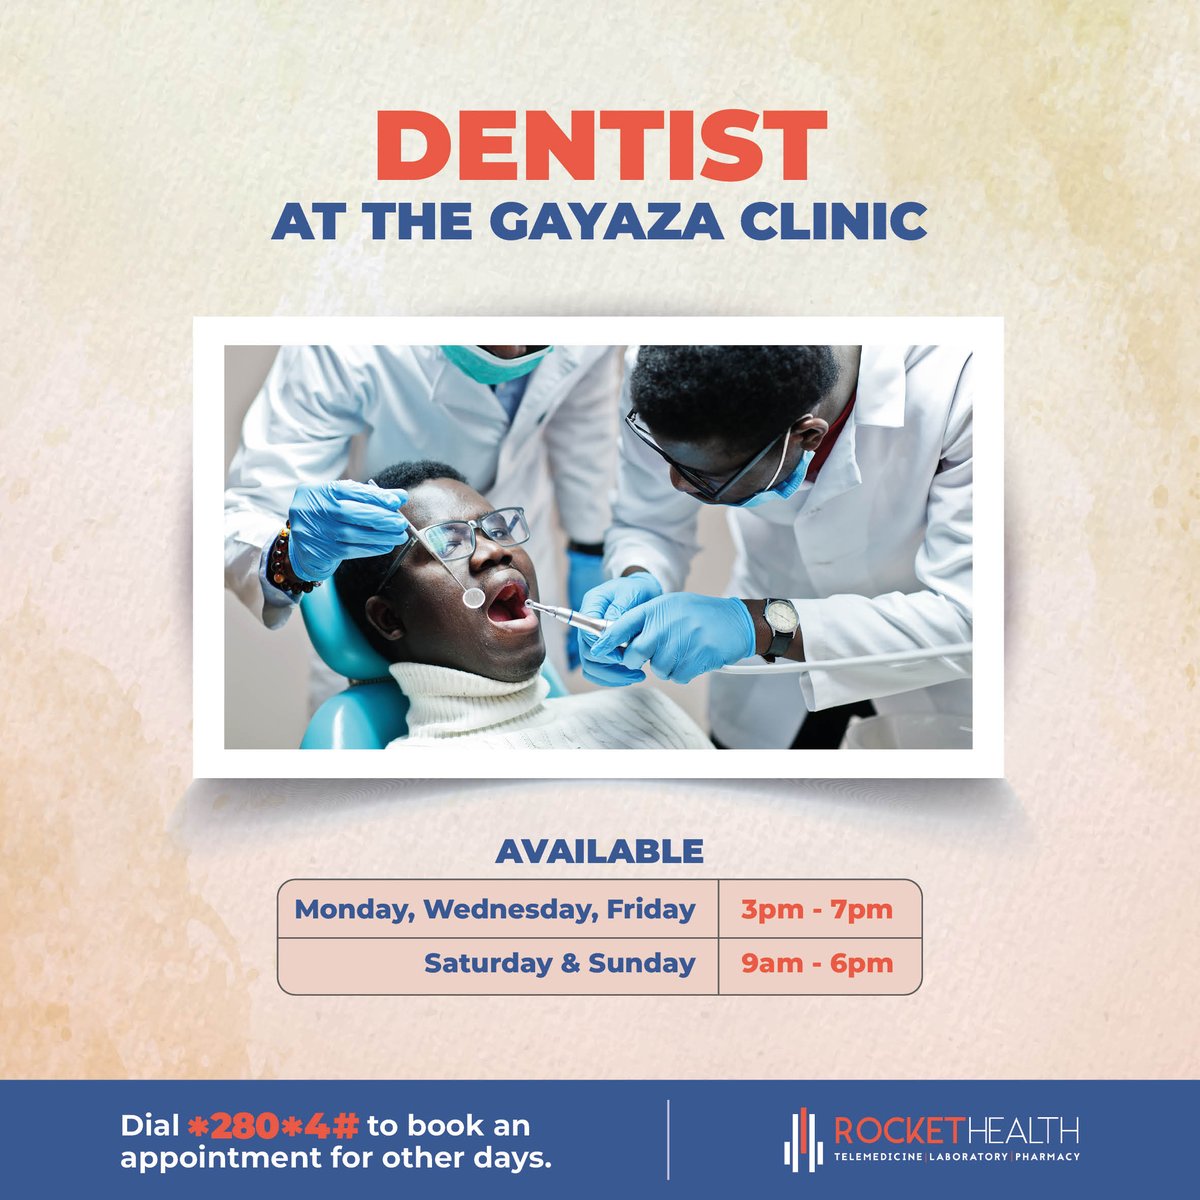 Upgrade your smile with our dental and oral care services. Visit the @RocketHealthUG Gayaza Clinic, along Gayaza - Kalagi Road.